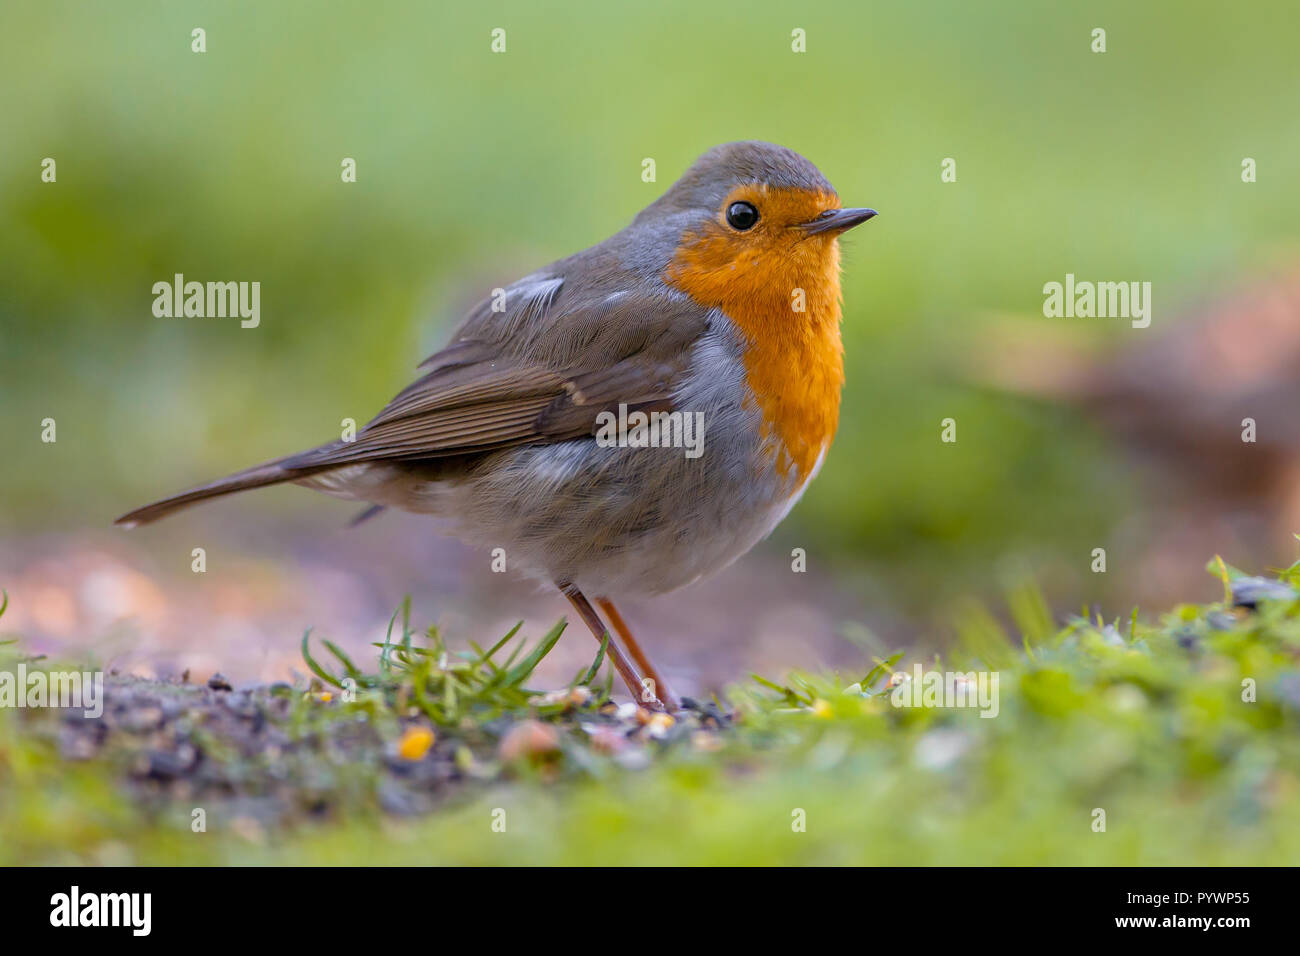 A red robin (Erithacus rubecula) foraging on the ground. This bird is a regular companion during gardening pursuits Stock Photo